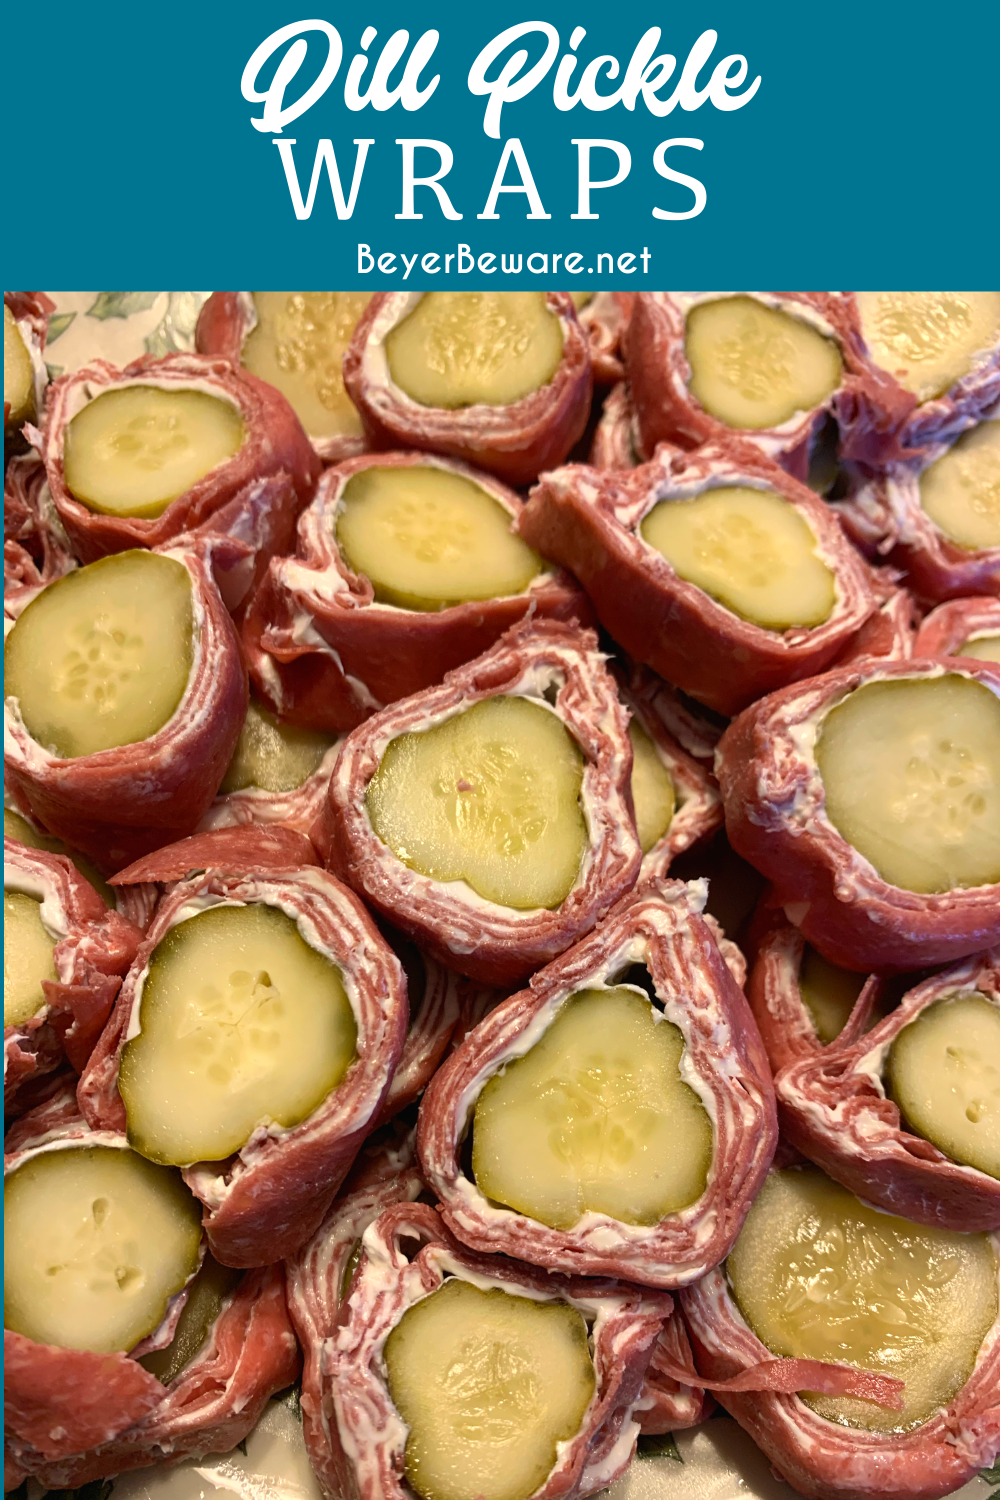 Dill pickle wraps are an easy low-carb snack or appetizer made by wrapping whole dill pickles in cream cheese and dried beef or ham deli slices to make what many call redneck sushi.